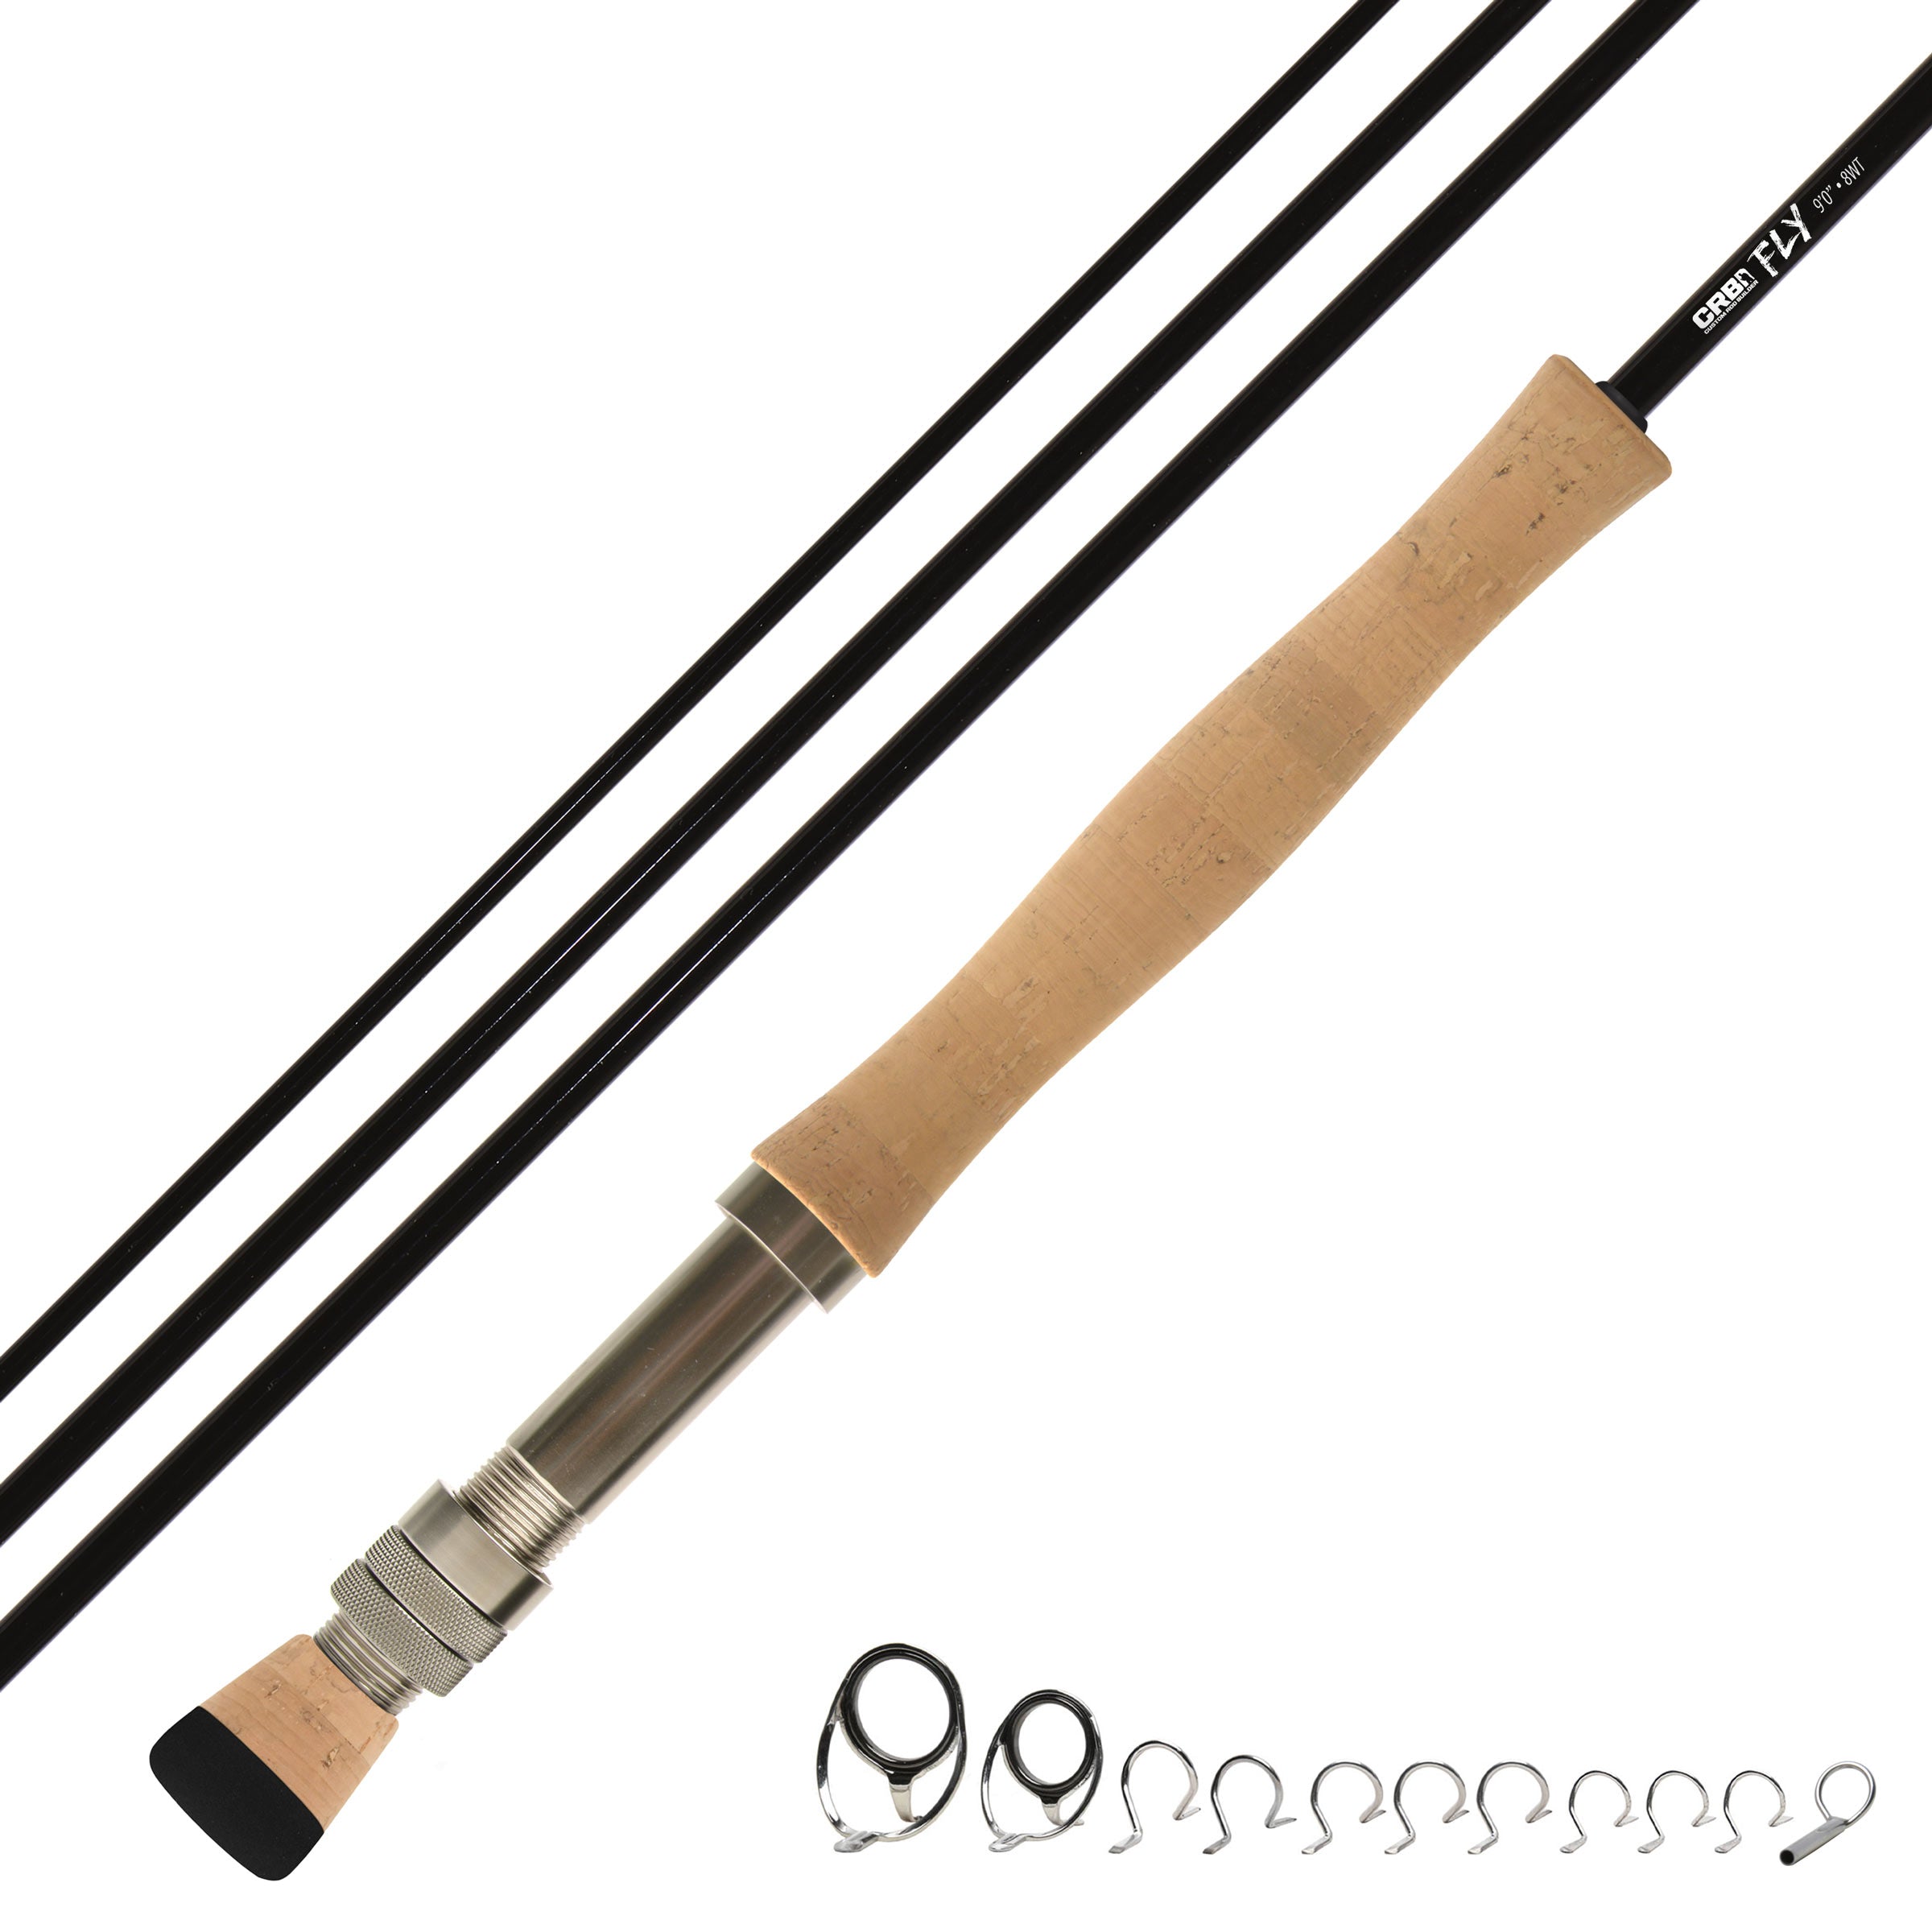 CRB 9'0 8wt Color Series Fly Rod Kit